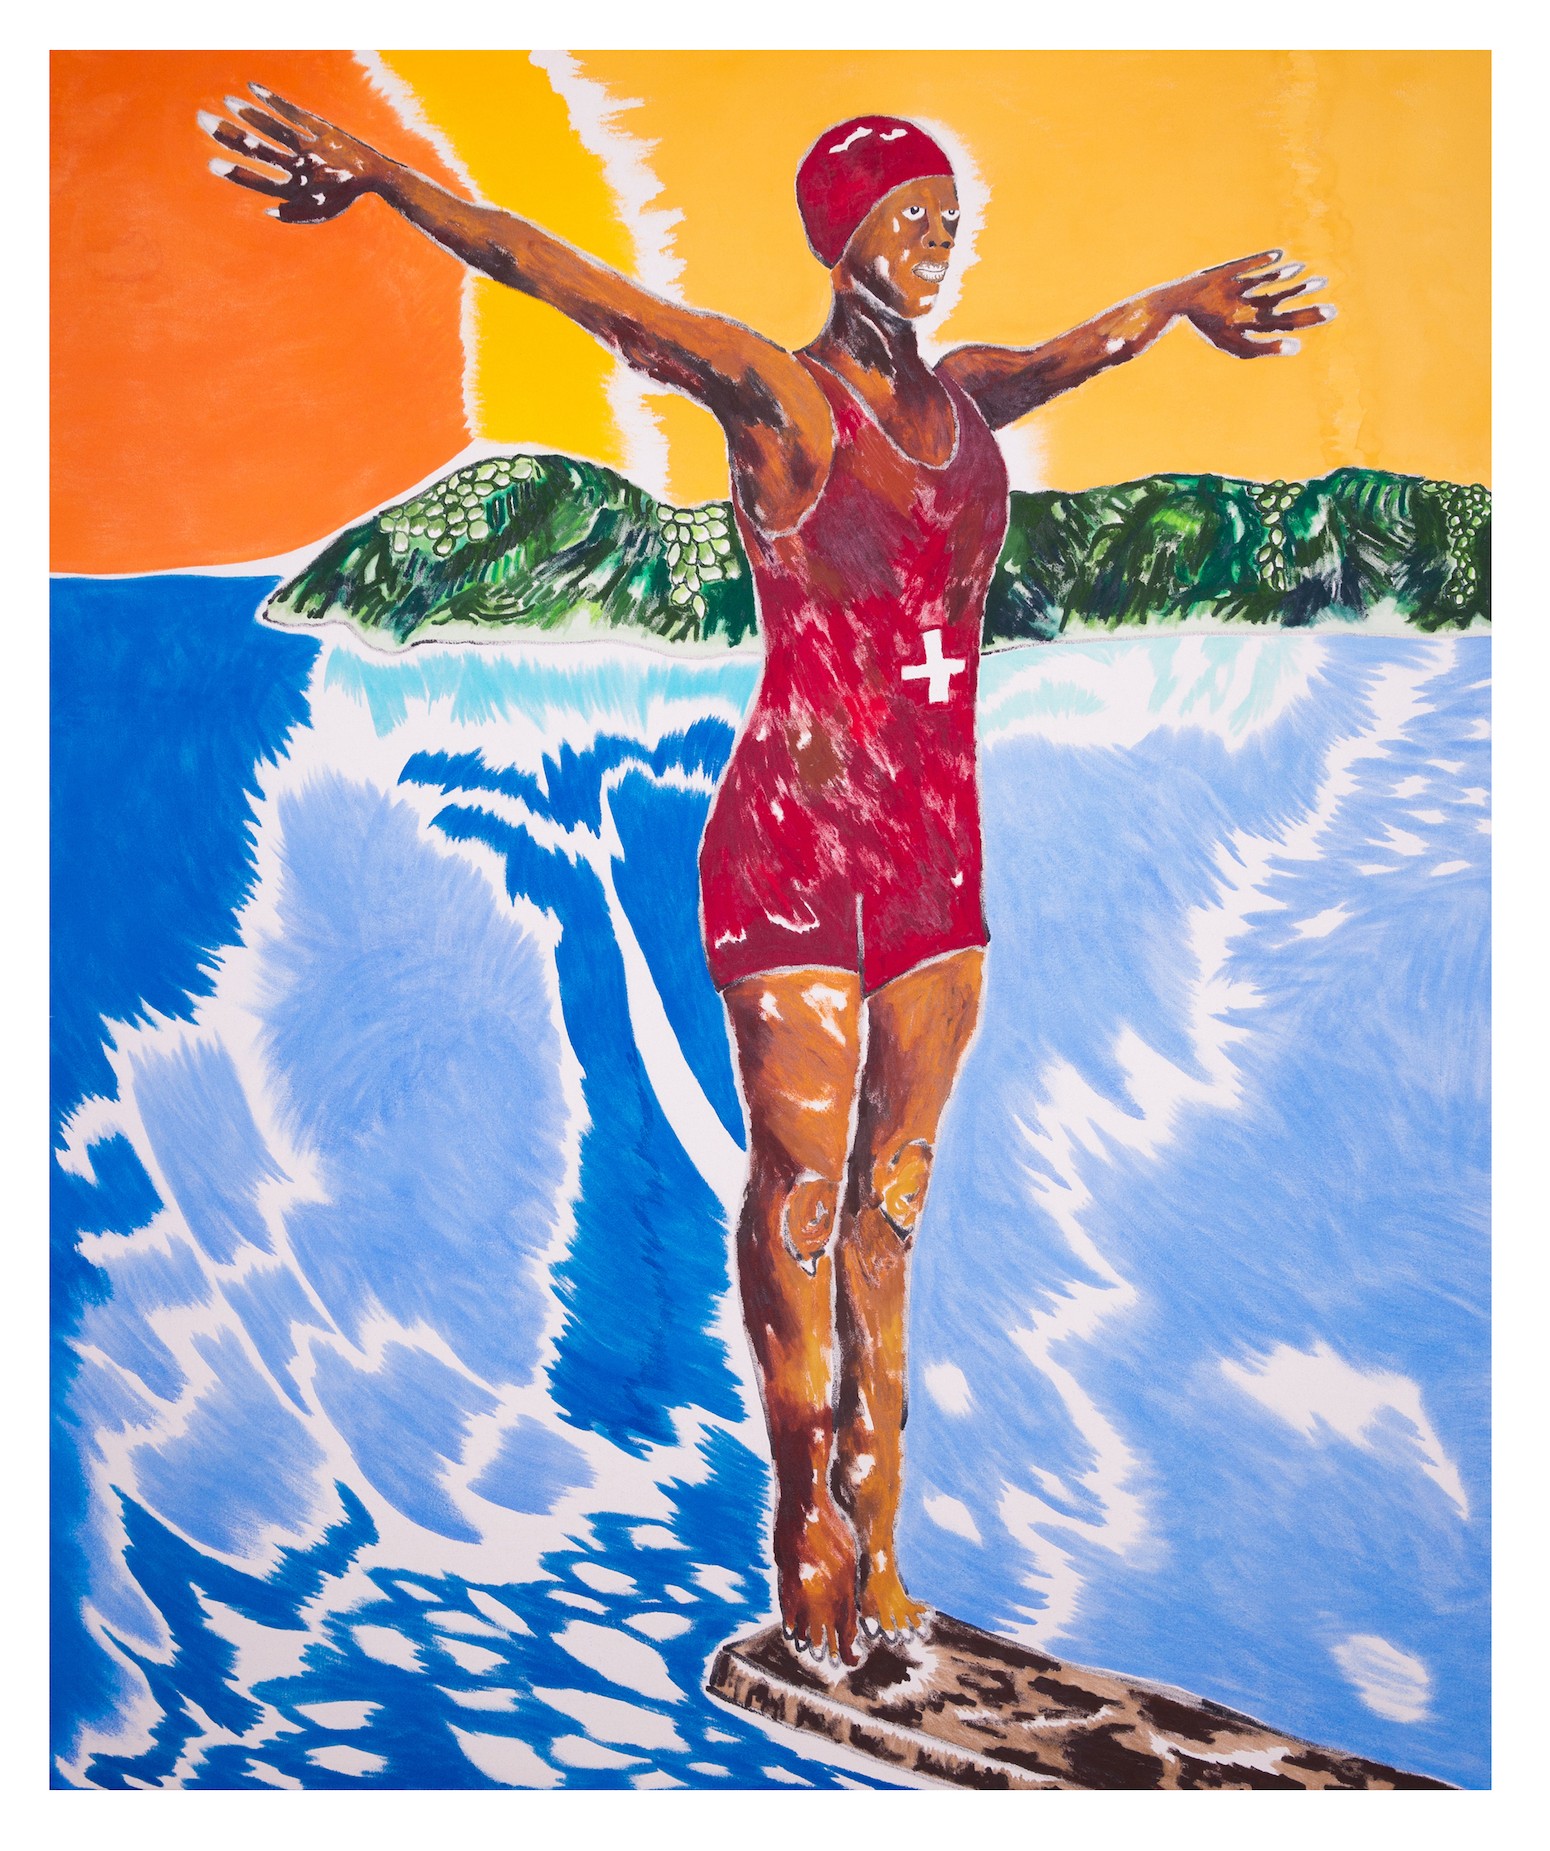 Chase Hall’s The Lifeguard, 2020, 72" x 60," Acrylic and coffee on cotton canvas. Painting of a lifeguard wearing a red bathing suit and swimming cap, standing on a diving board with their back to the water.